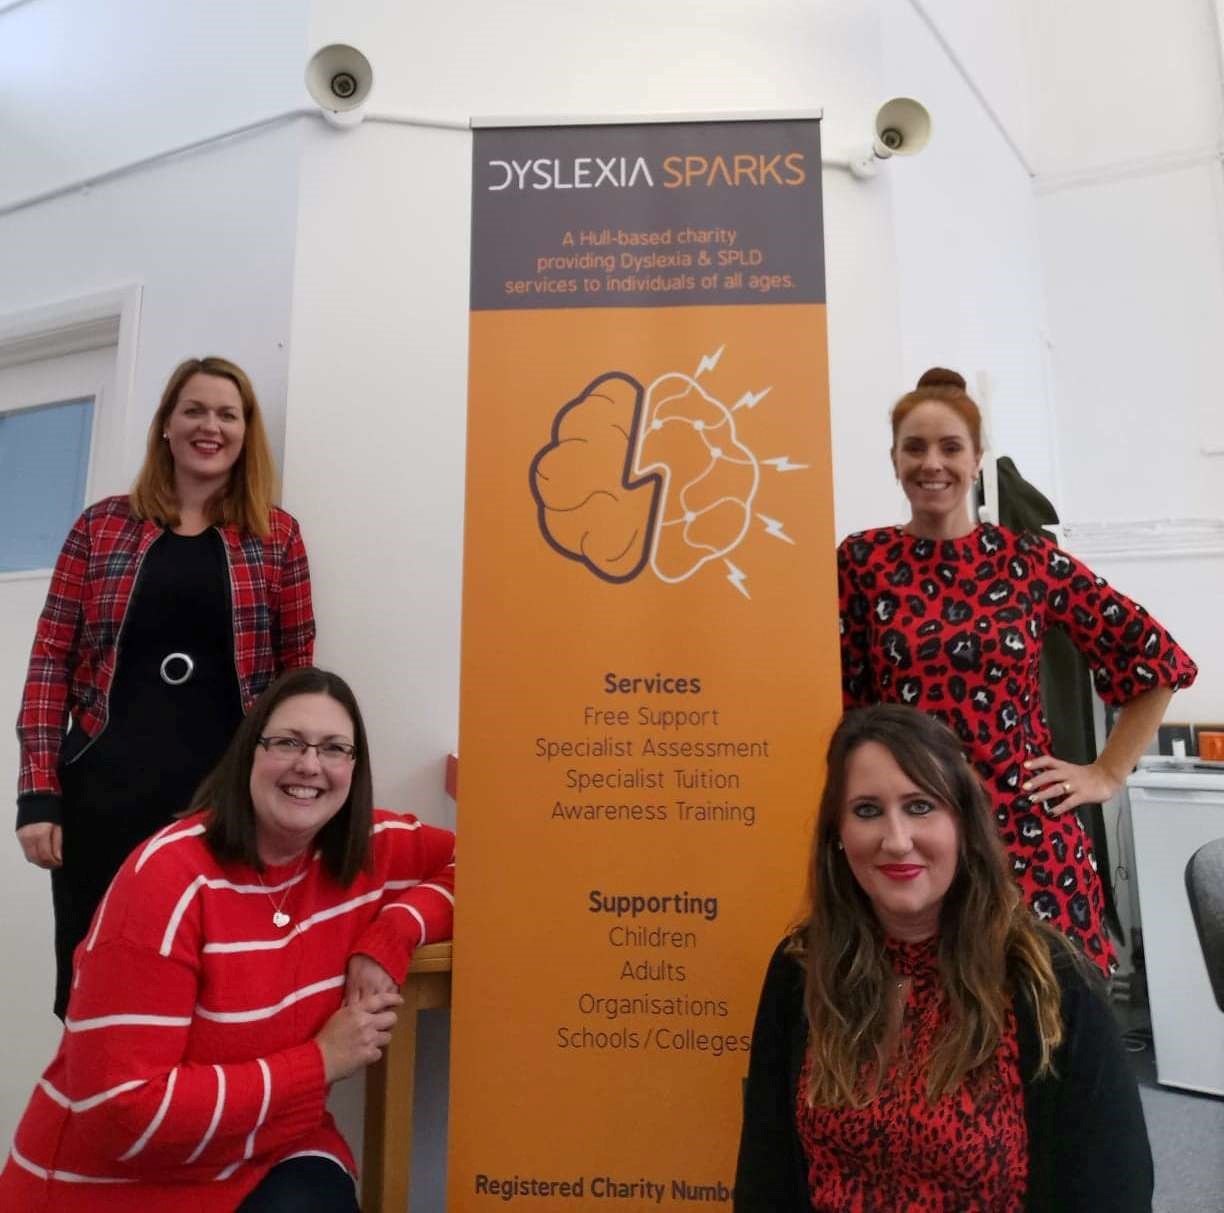 Dyslexia Sparks specialist teachers and assessors wearing red.